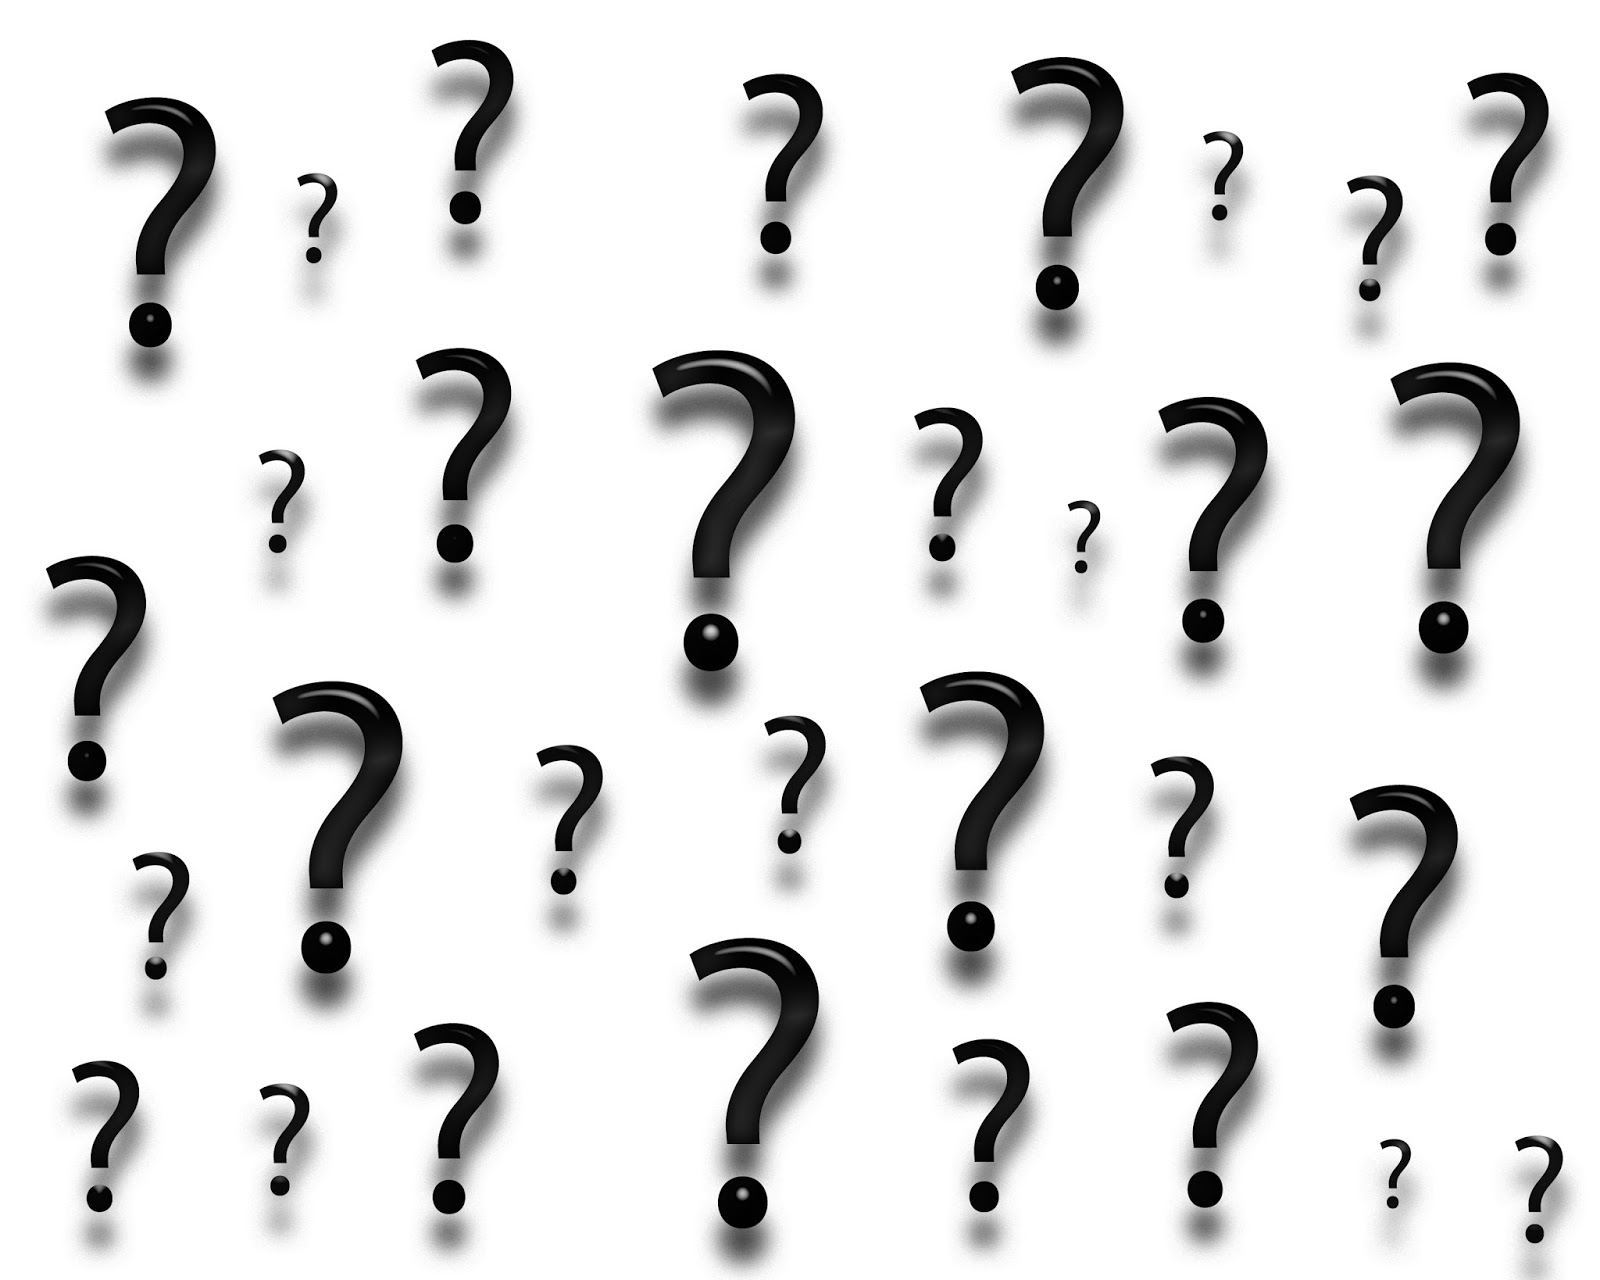 CJO Photo: Printable Black and White Art 8x10: Question Marks